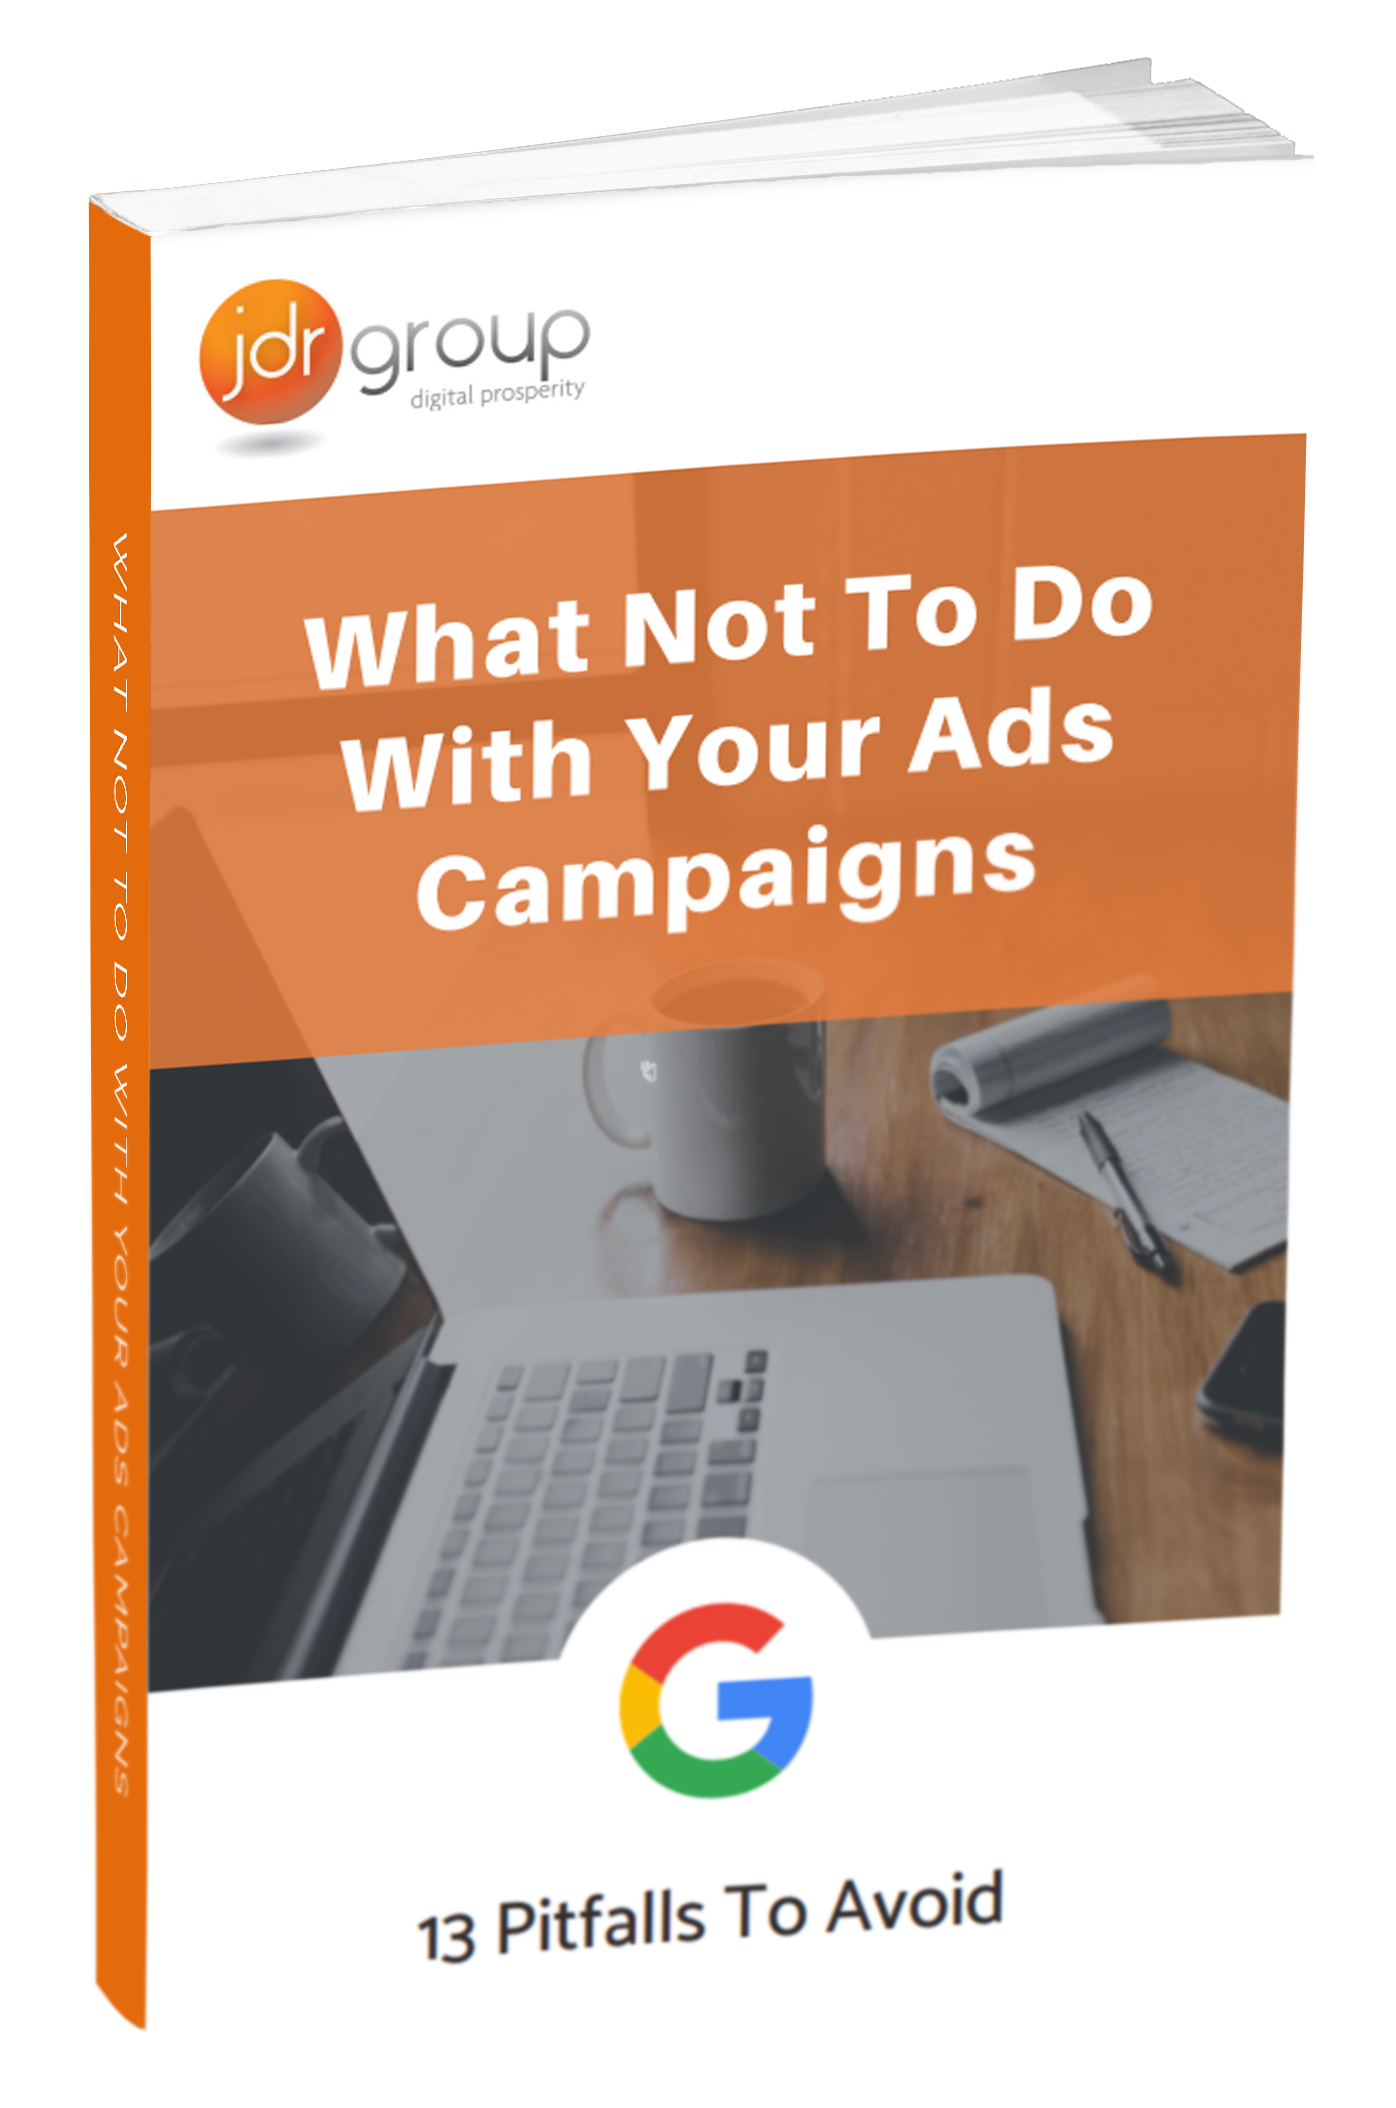 JDR-What-Not-To-Do-With-Your-Ads-Campaigns-Guide-MockUp